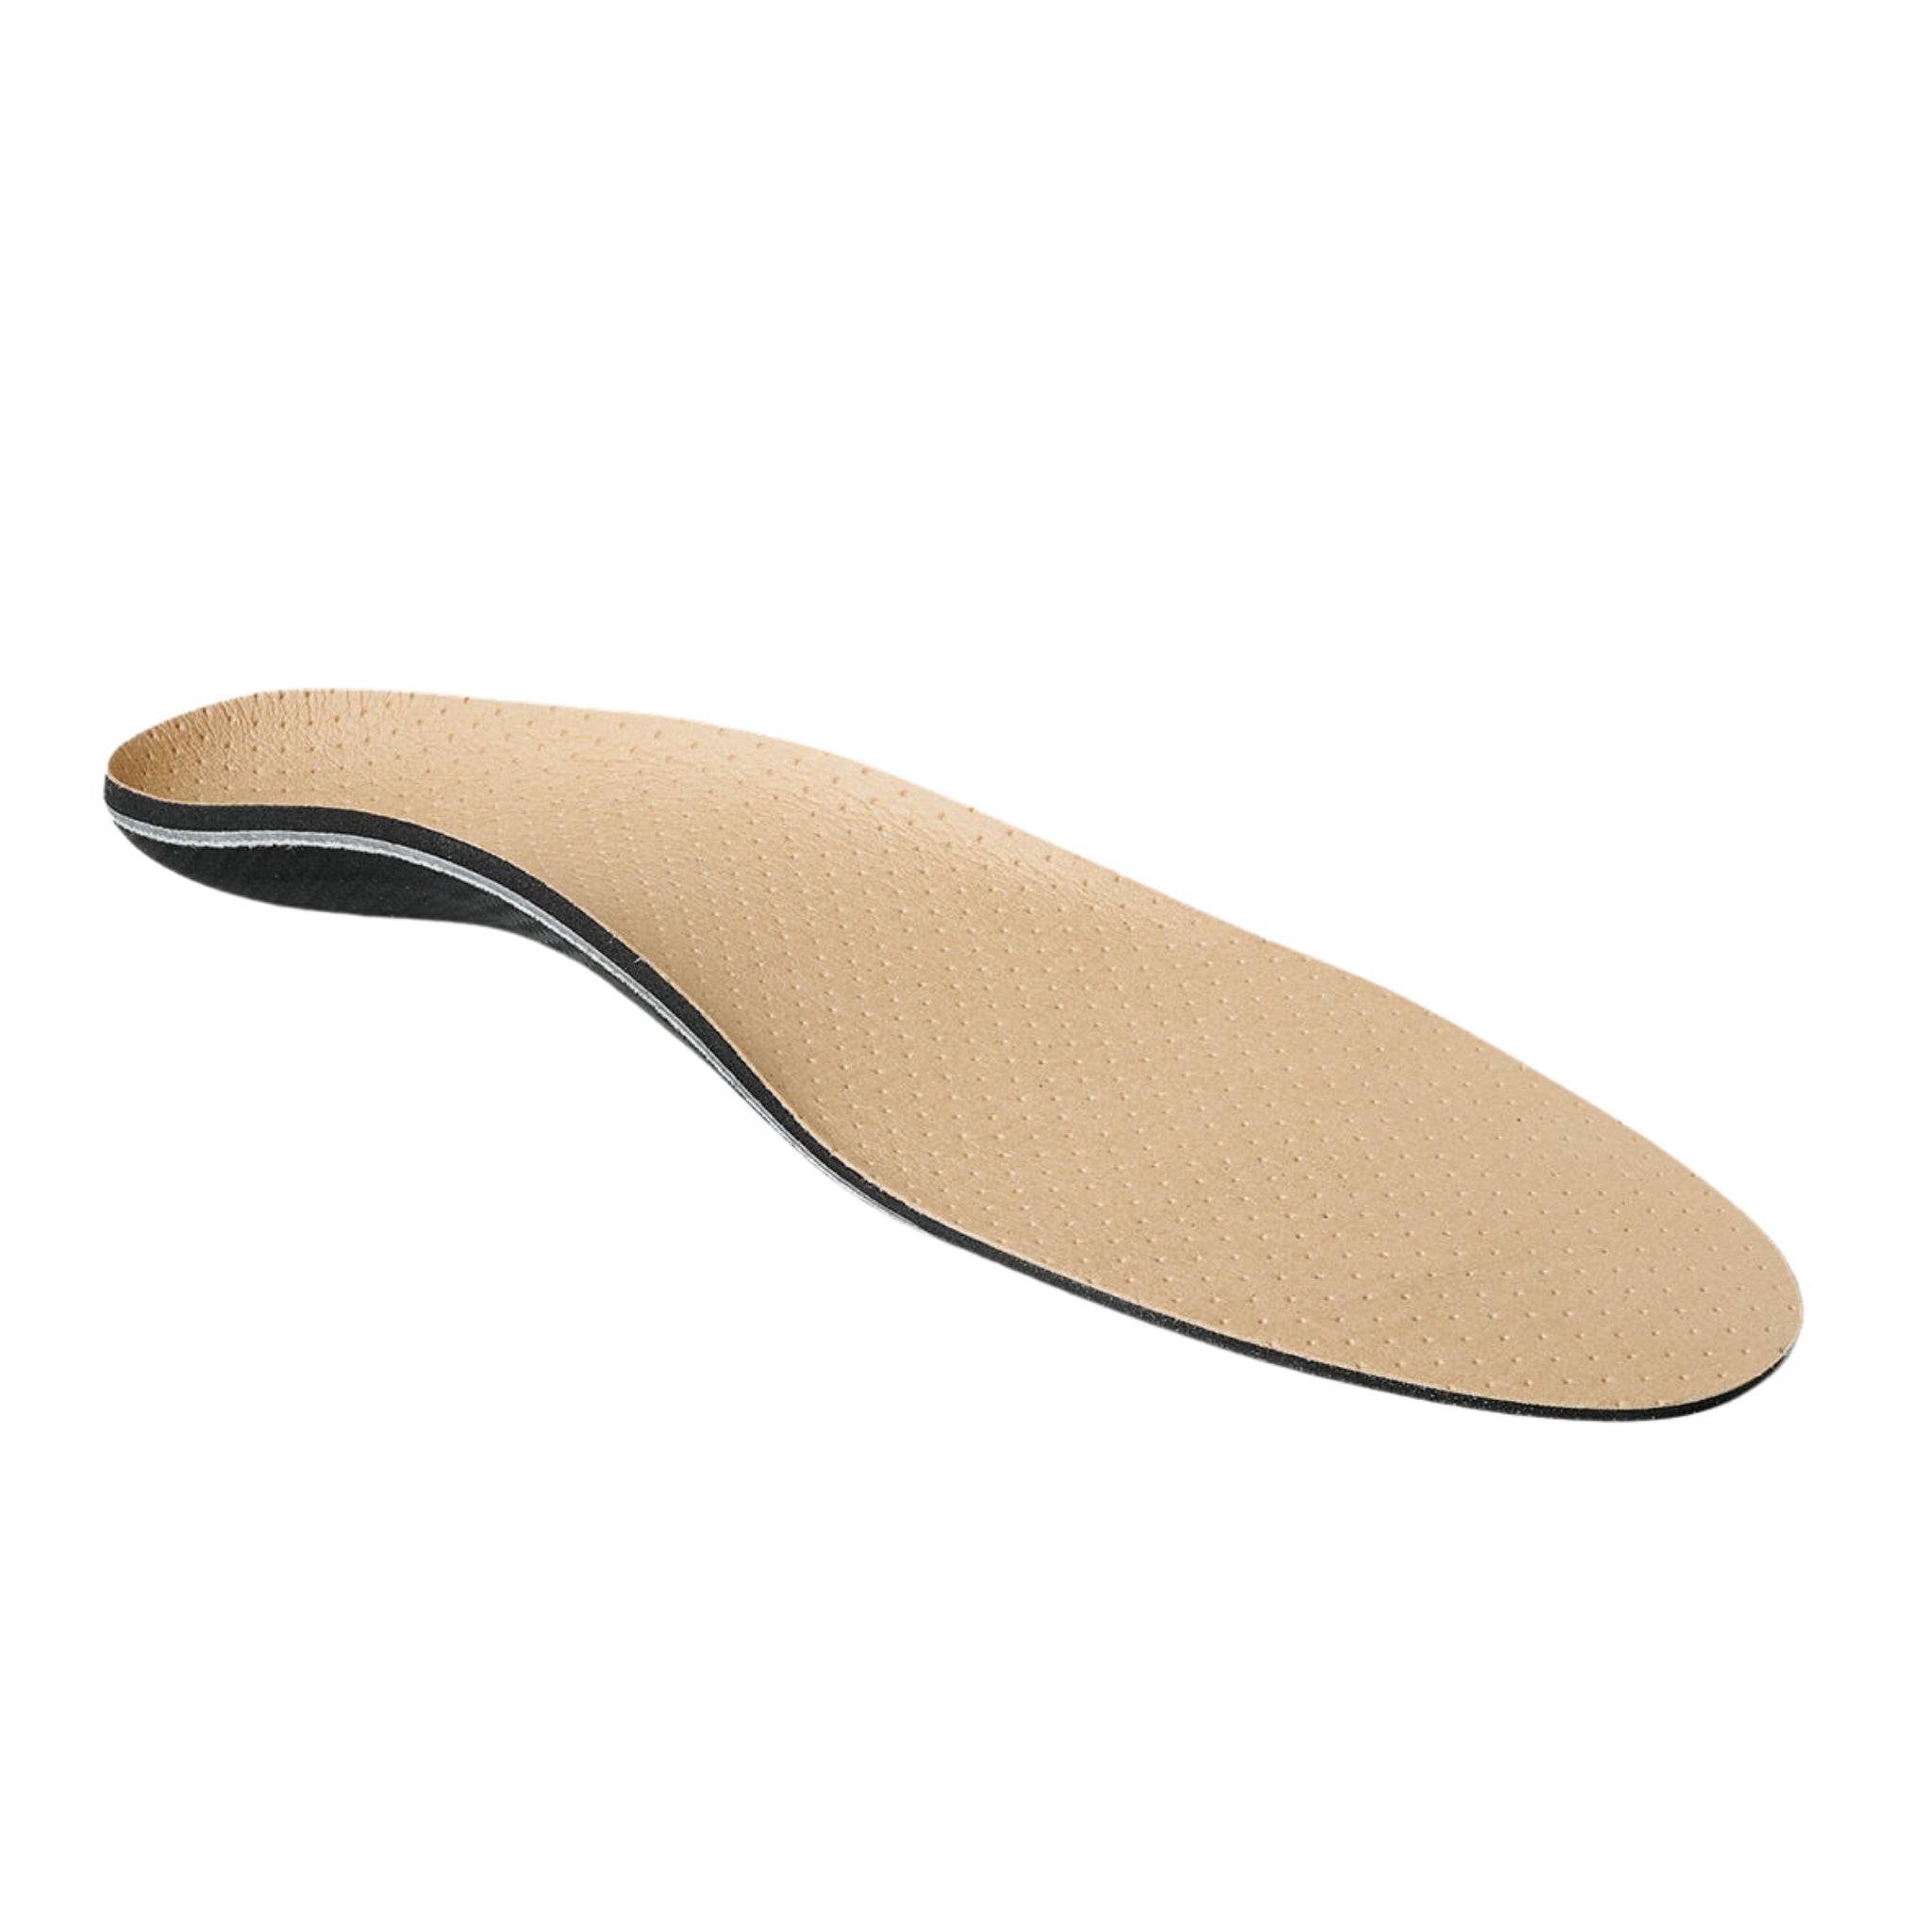 Foot Support Business | Orthotic Insoles for Dress Shoes | Support & Comfort